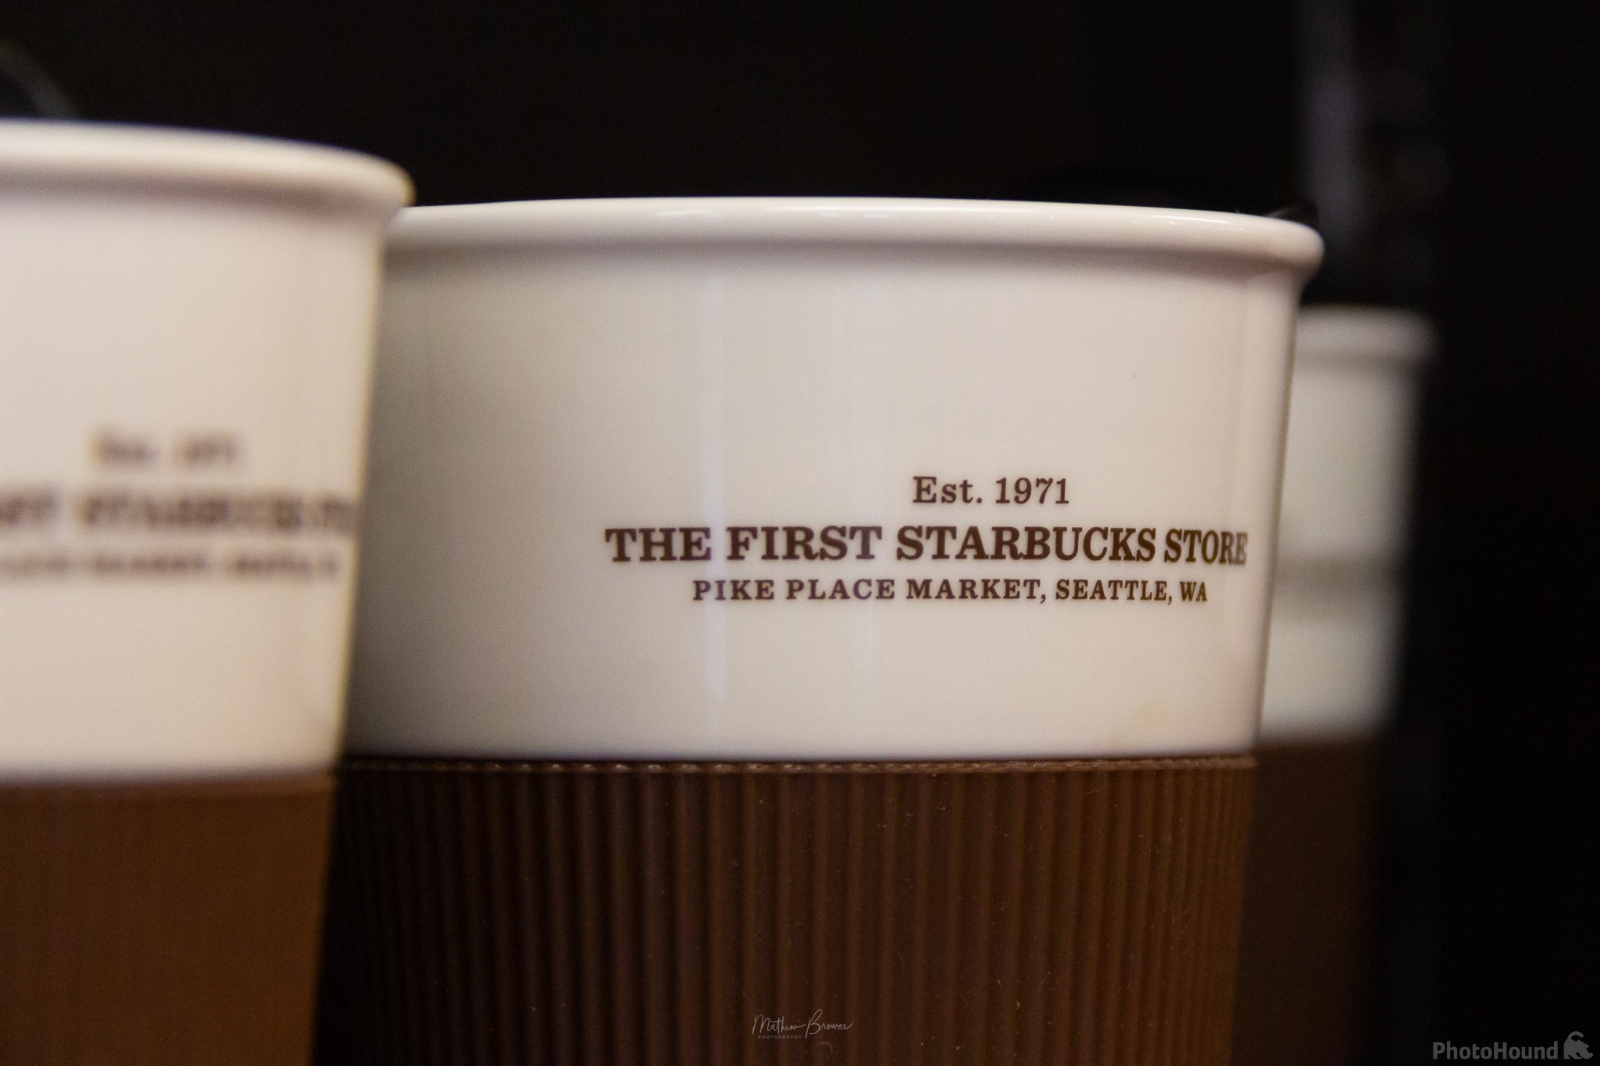 Image of The First Starbucks by Mathew Browne